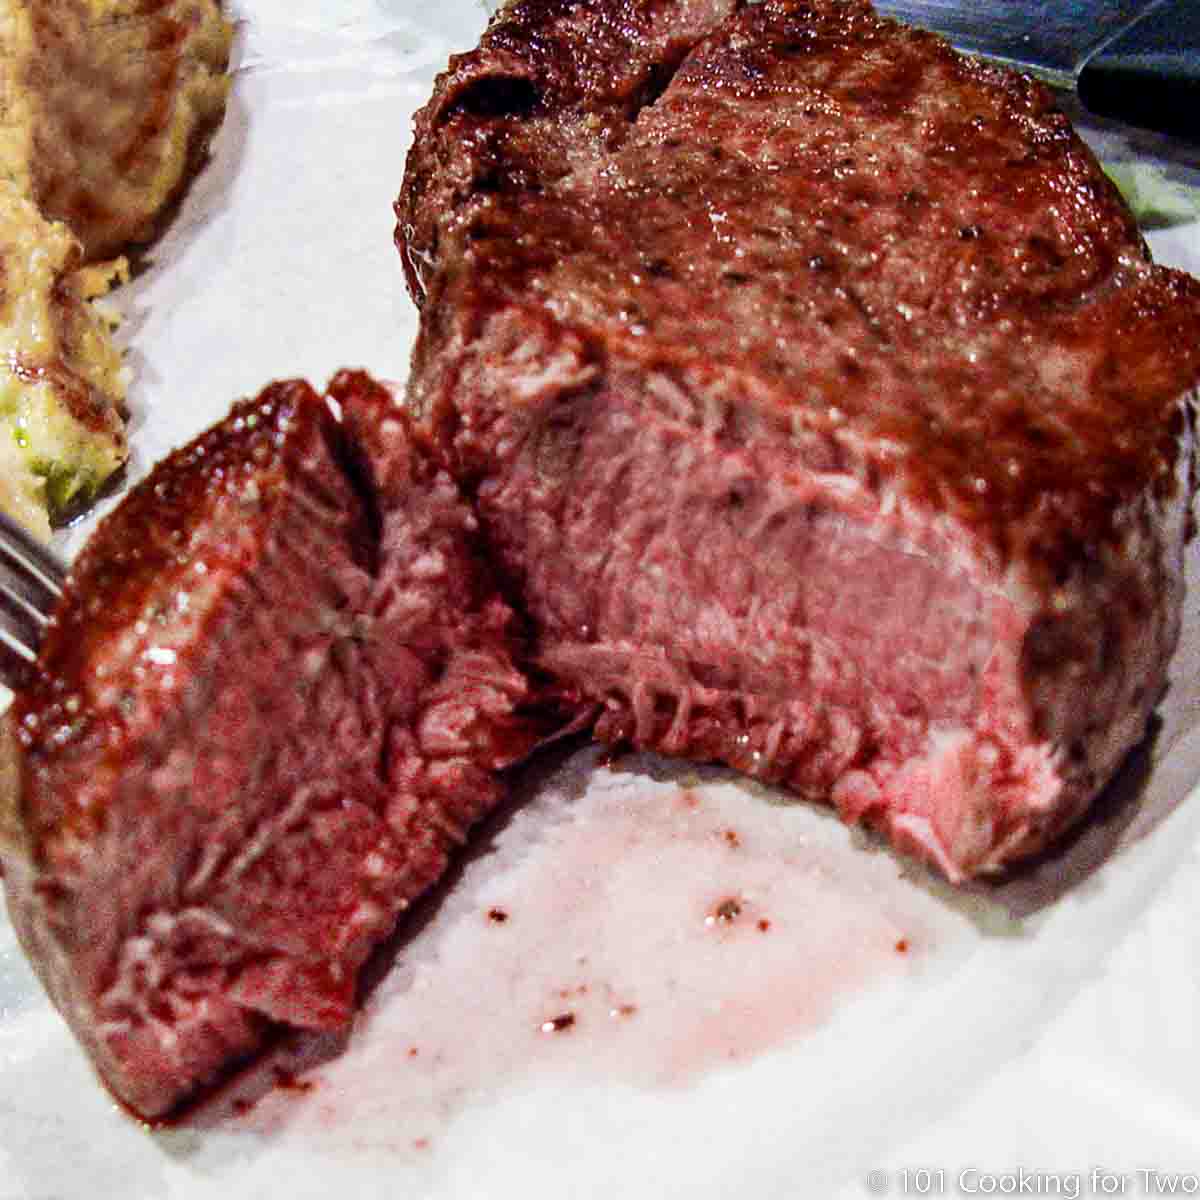 cut filet on a white plate.